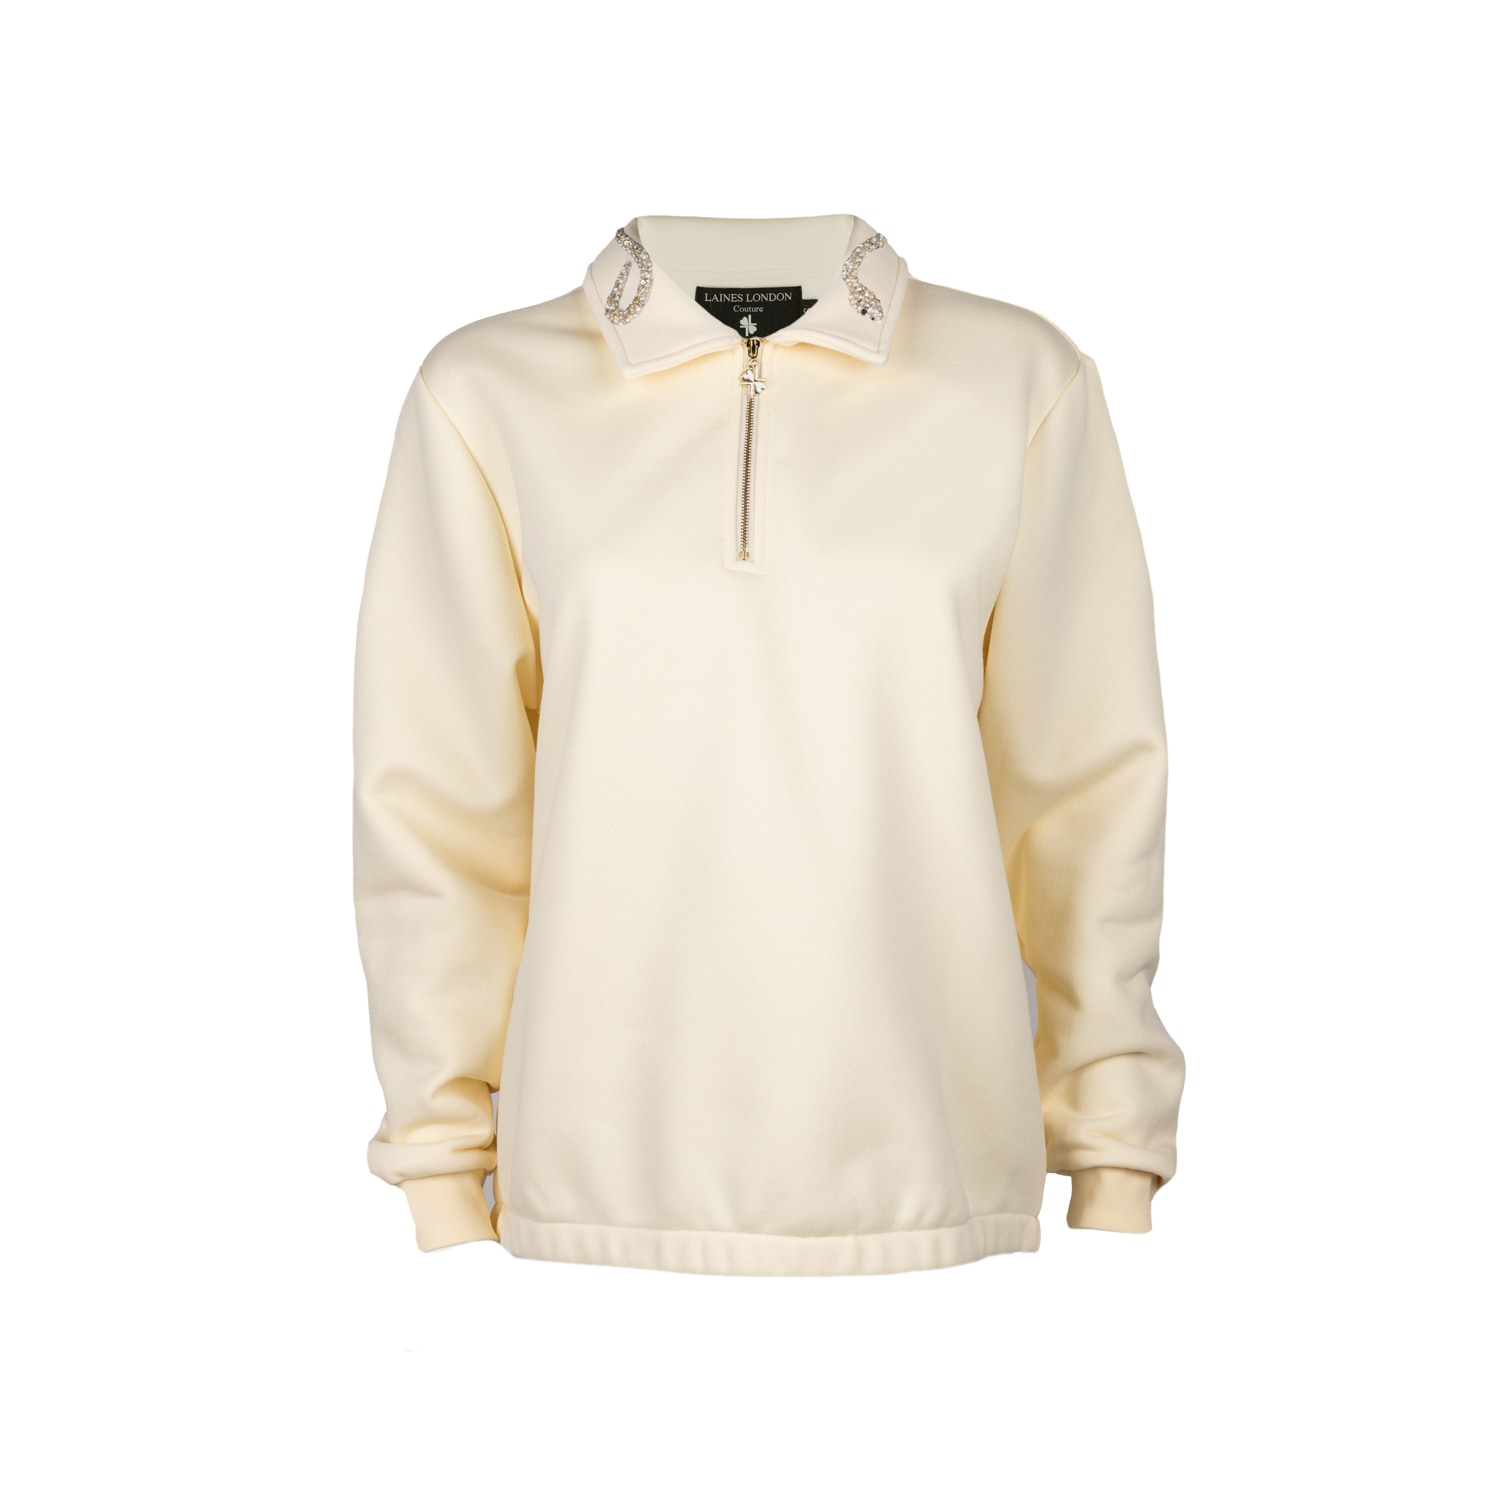 Women’s Neutrals Laines Couture Cream Quarter Zip Sweatshirt With Embellished Crystal & Pearl Snake Small Laines London